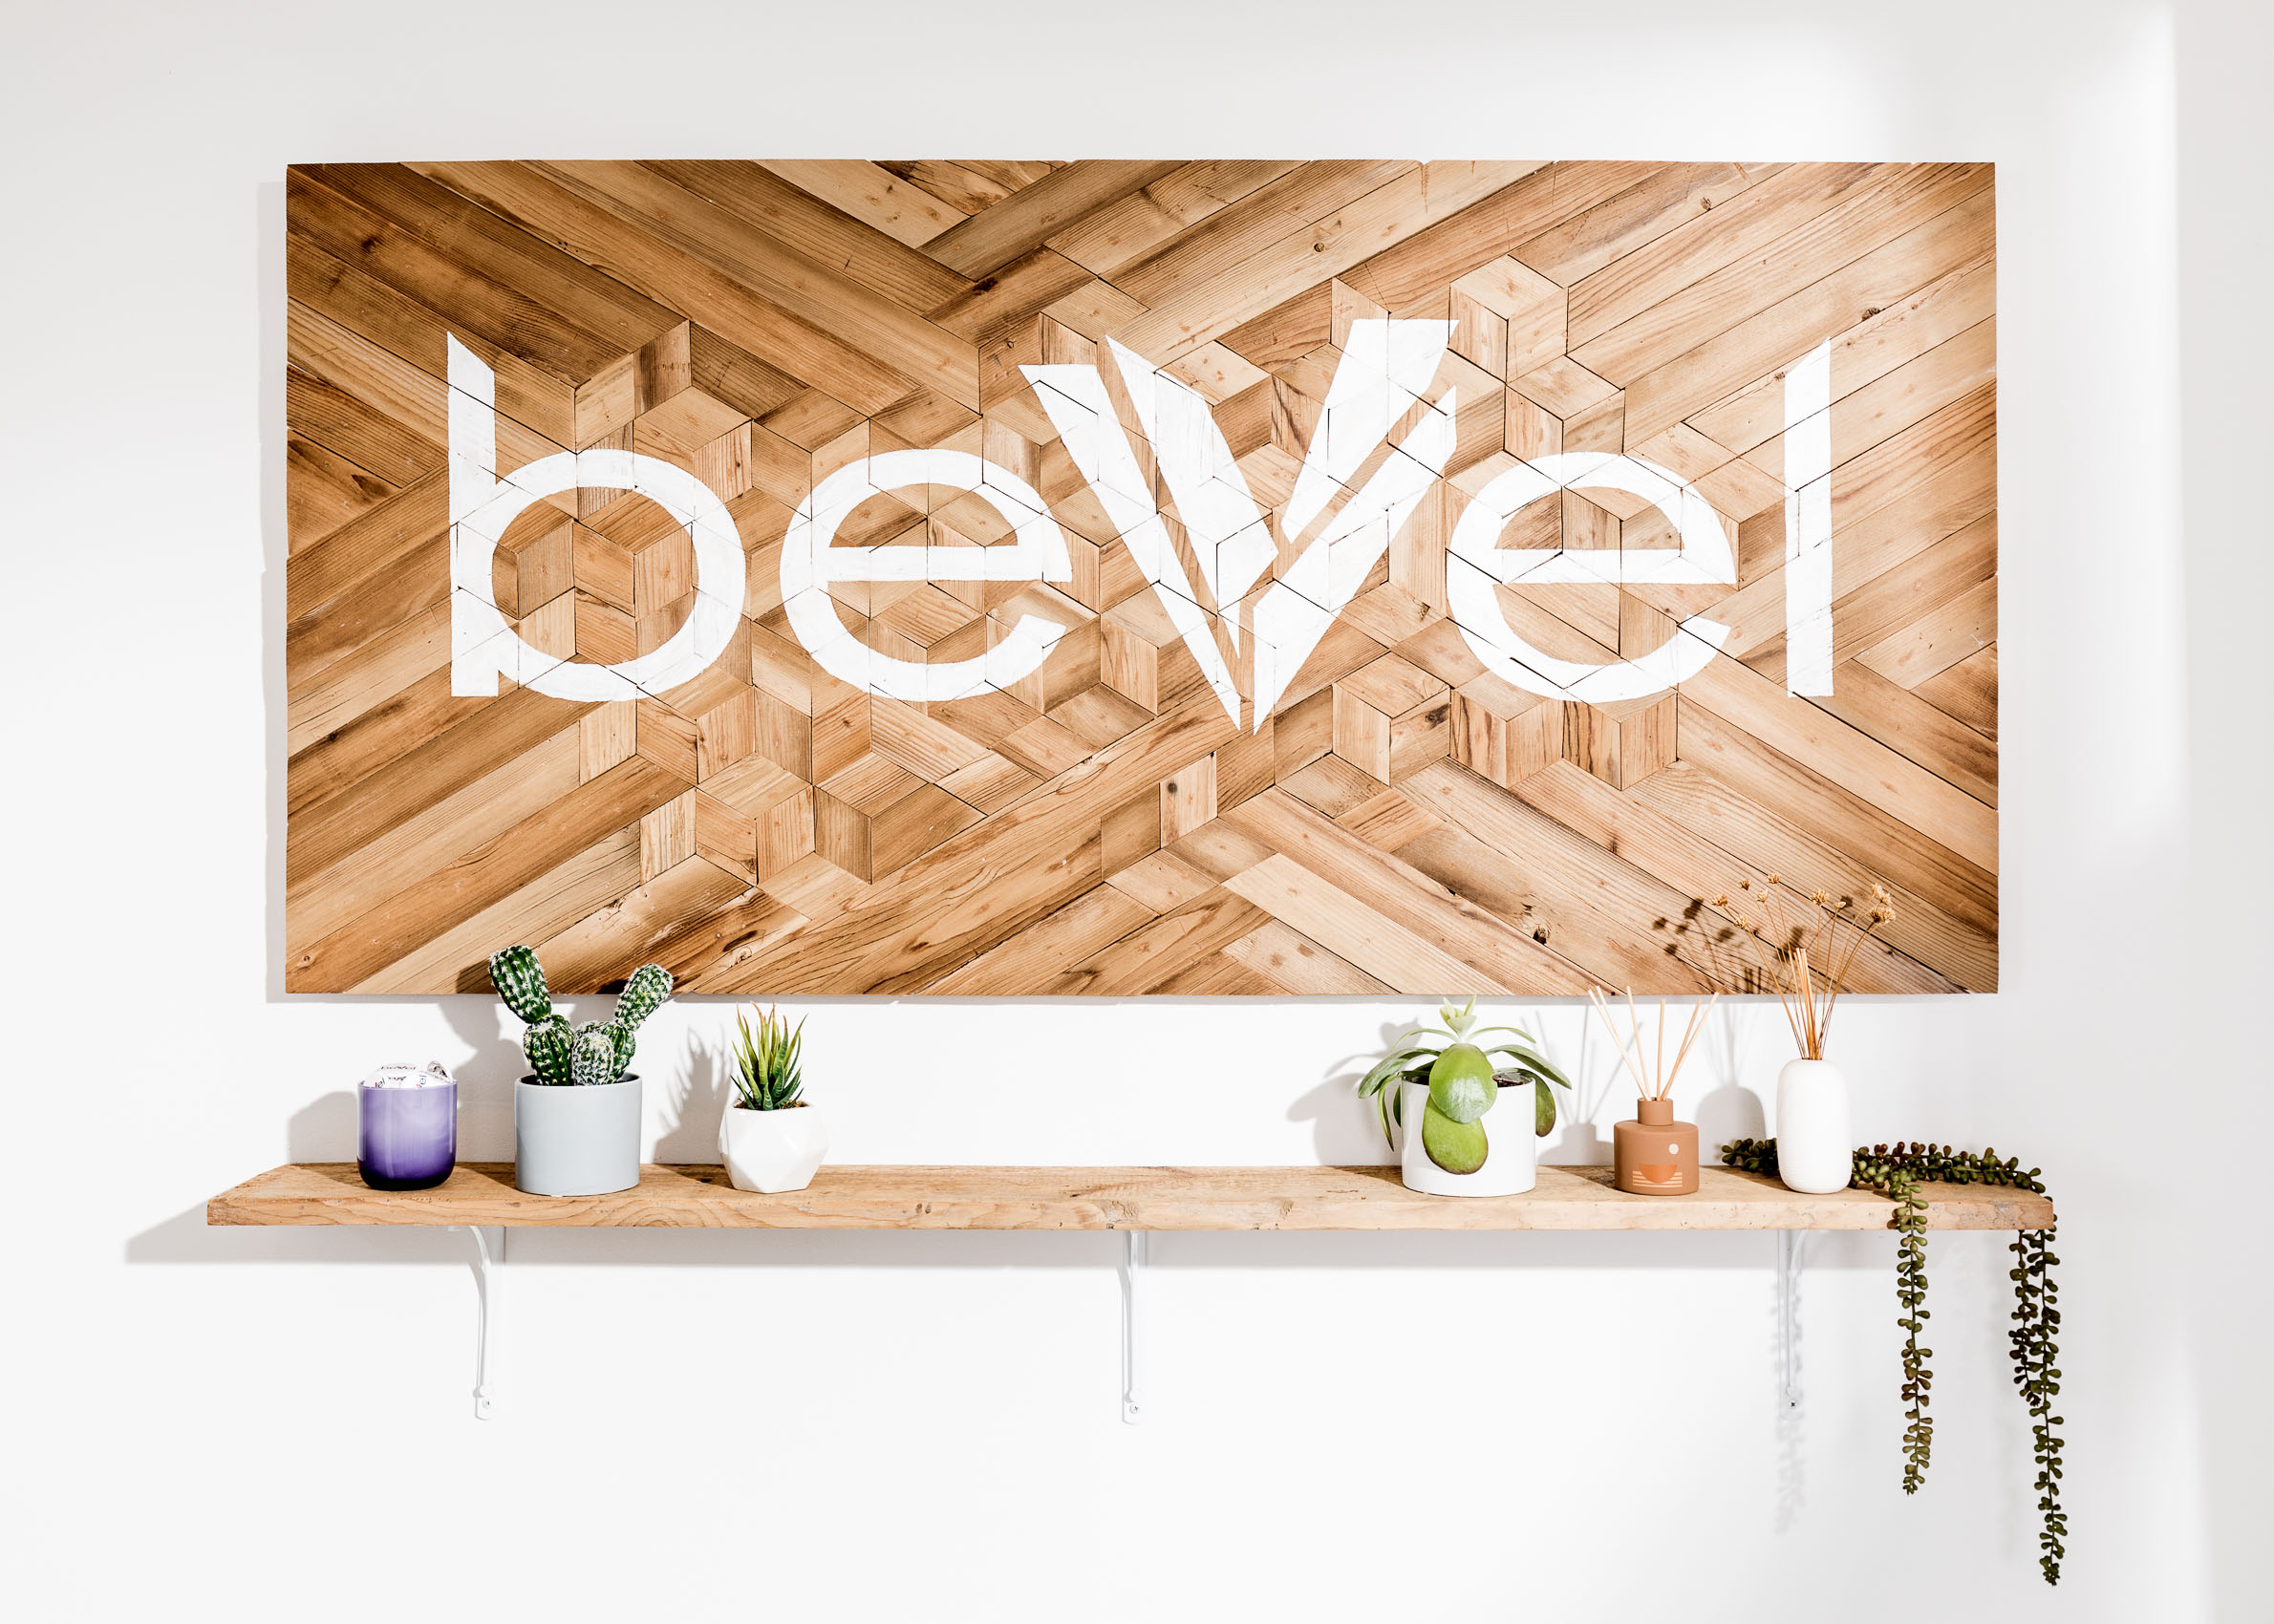 Bevel PR | Los Angeles | Editorial and Commercial Photographer Patrick Strattner